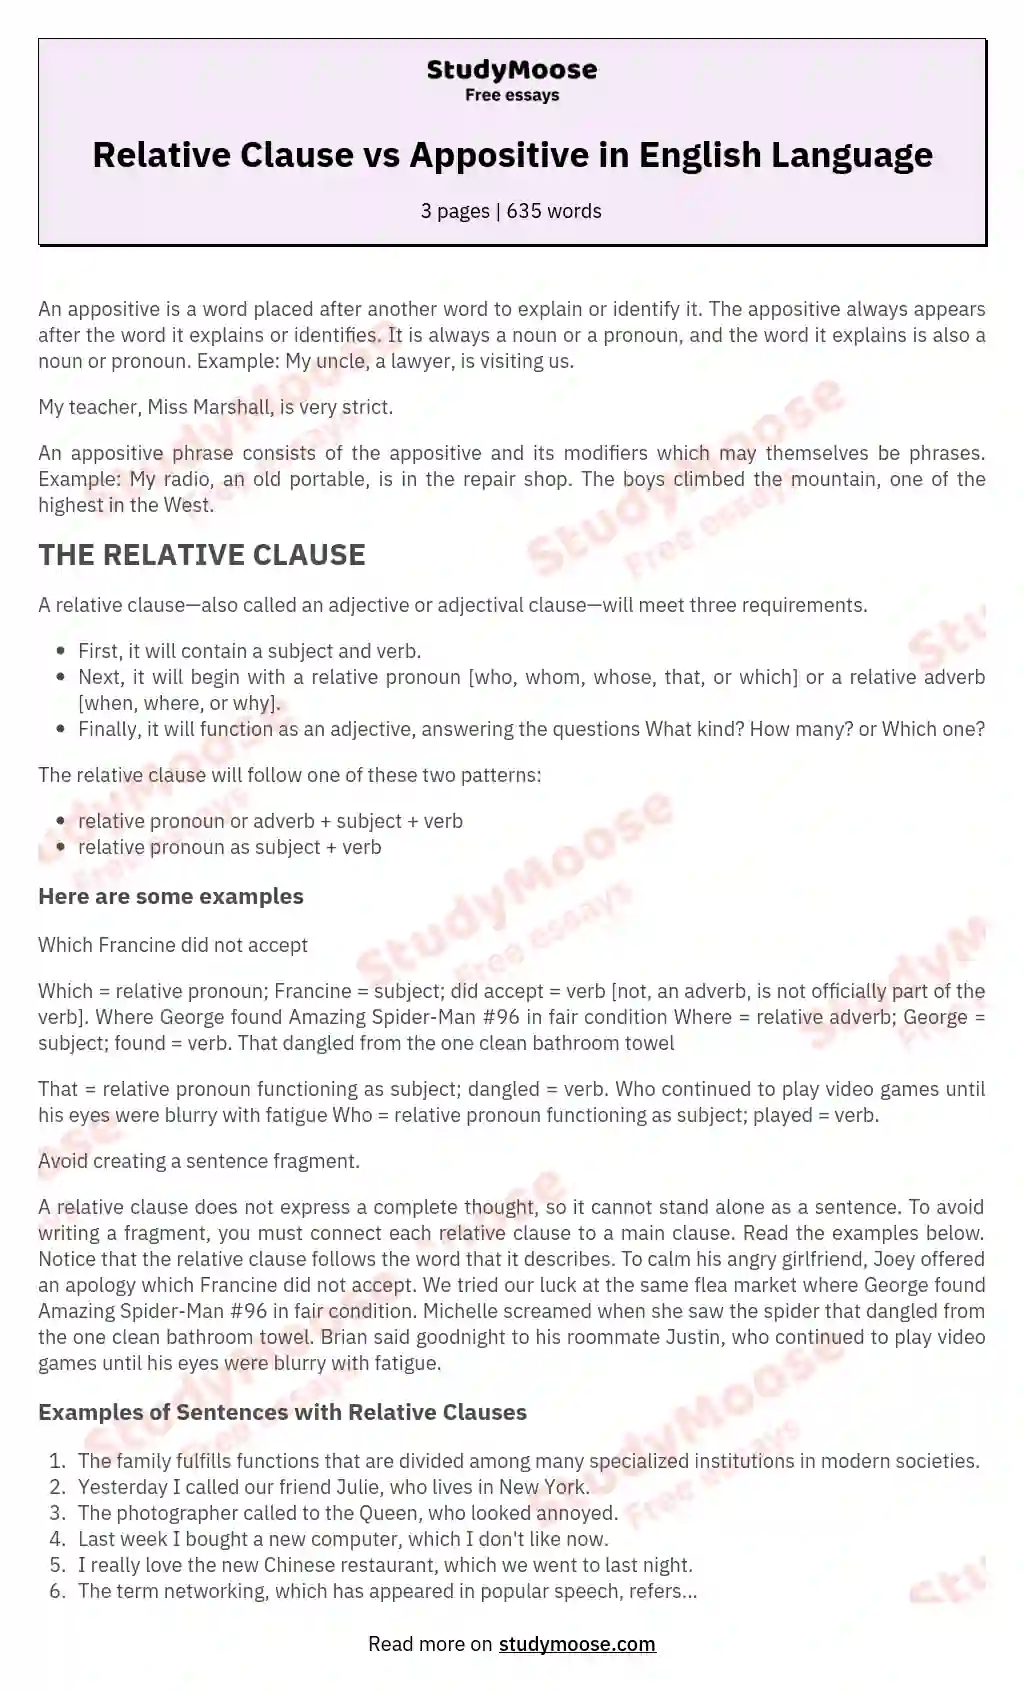 Relative Clause vs Appositive in English Language essay